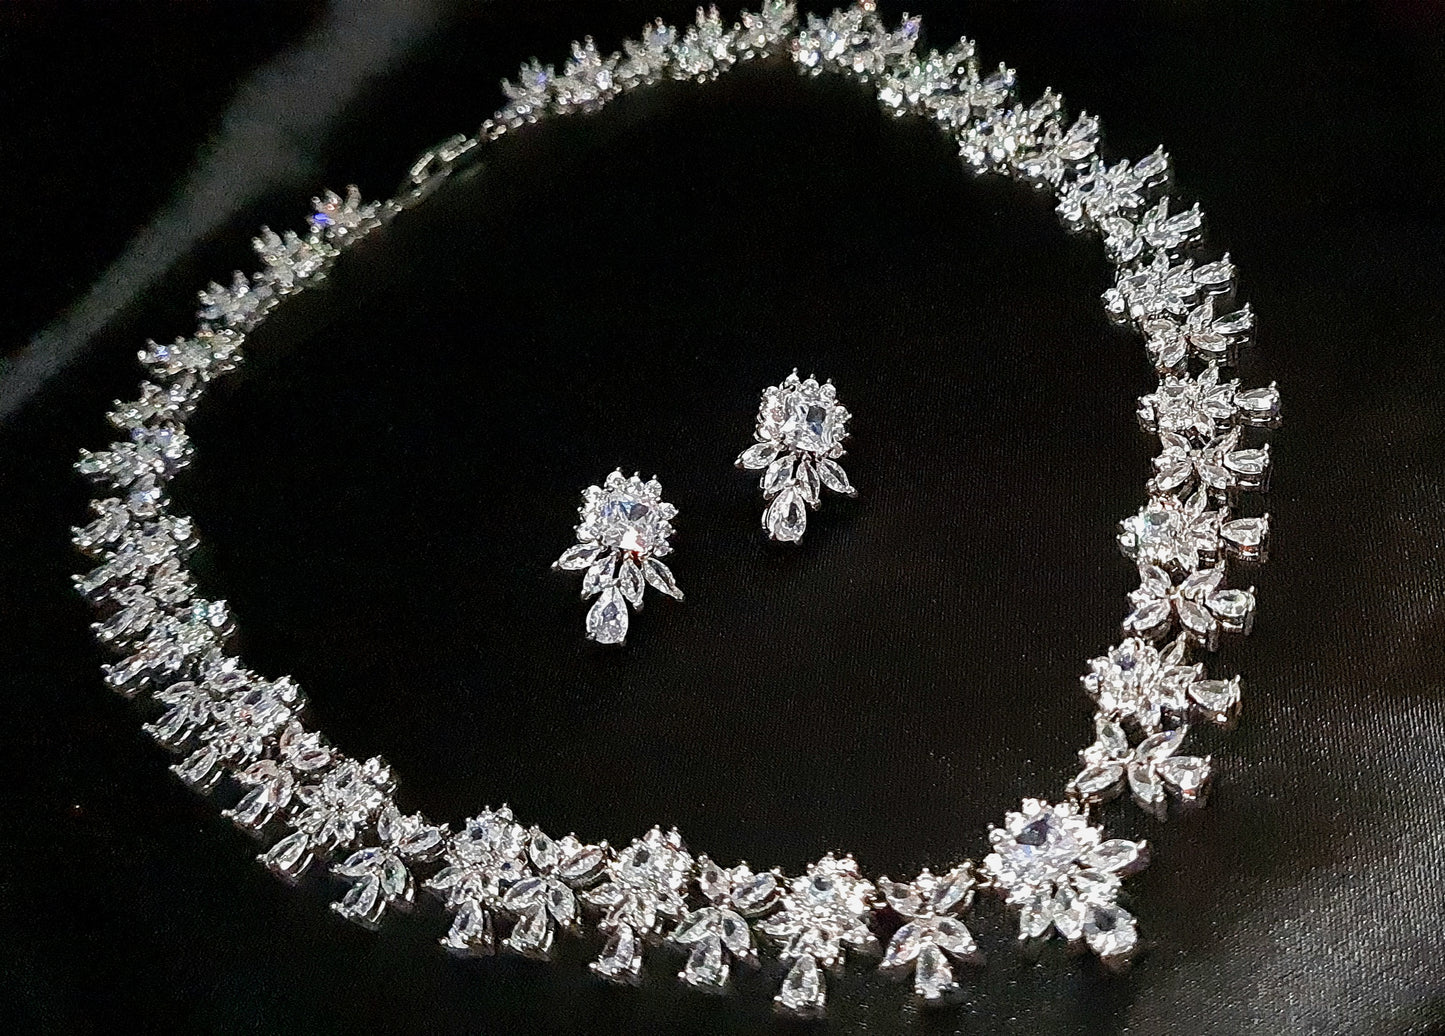 Elegant Adele necklace and earrings, cubic zirconia flower pendant, timeless jewelry.